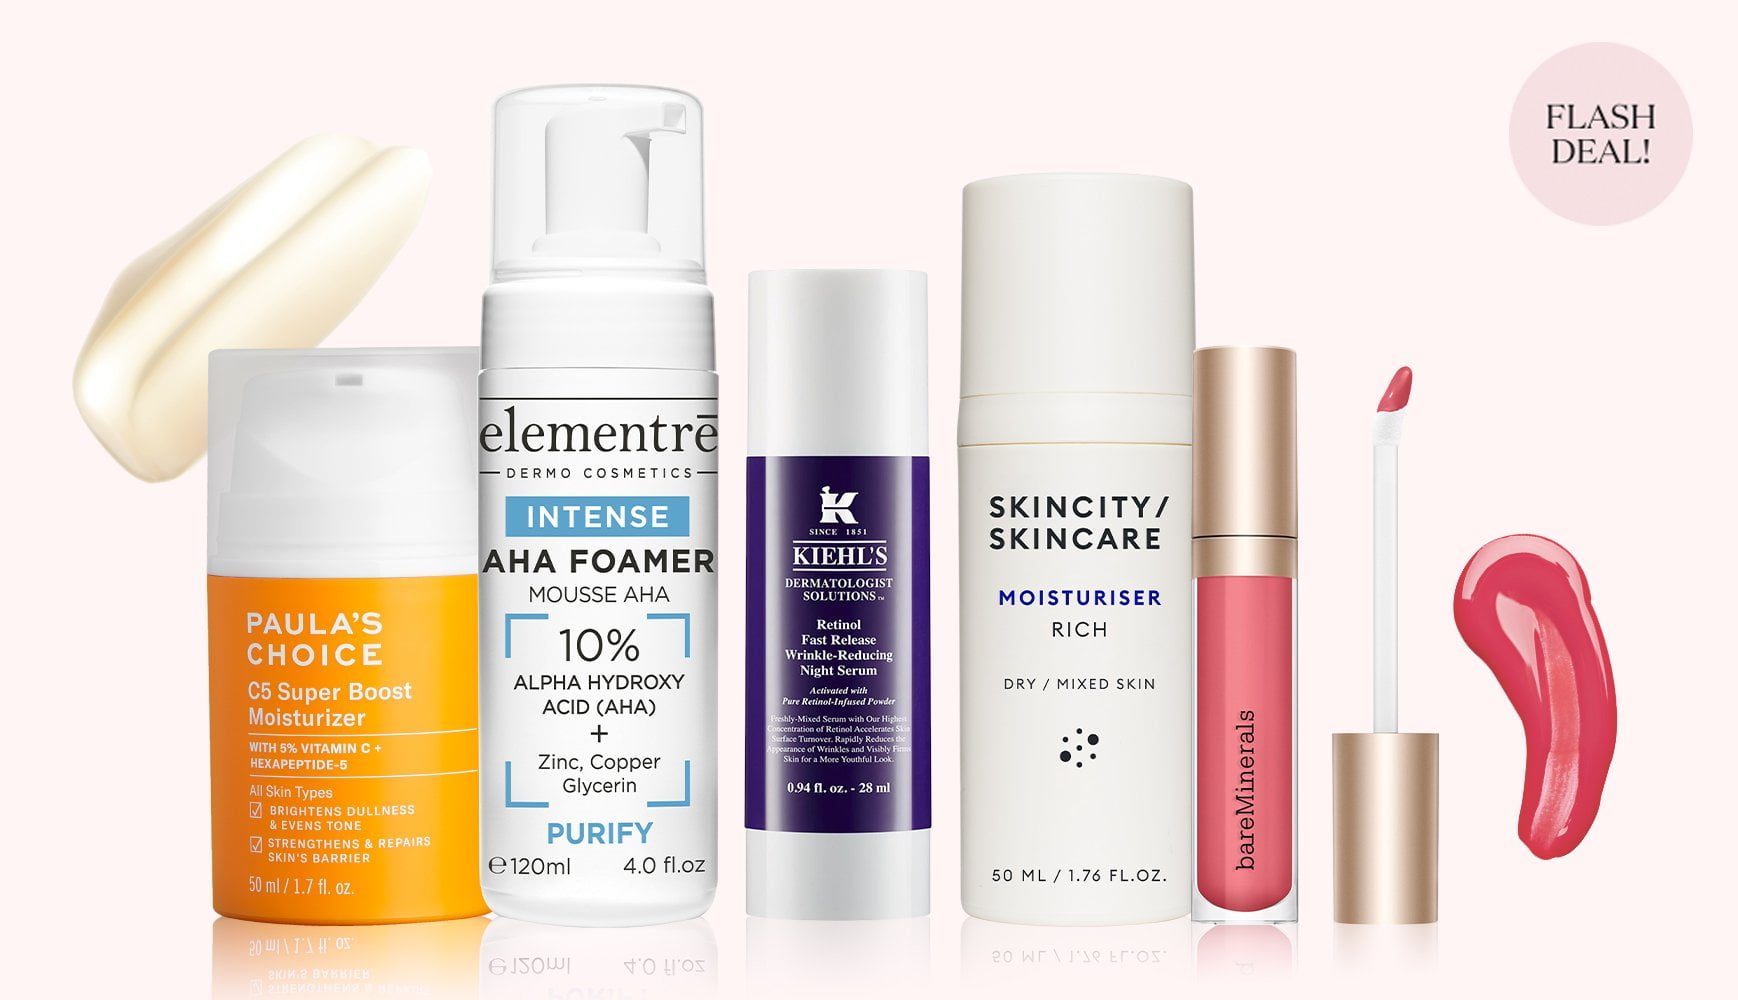 20% off everything at SkinCity